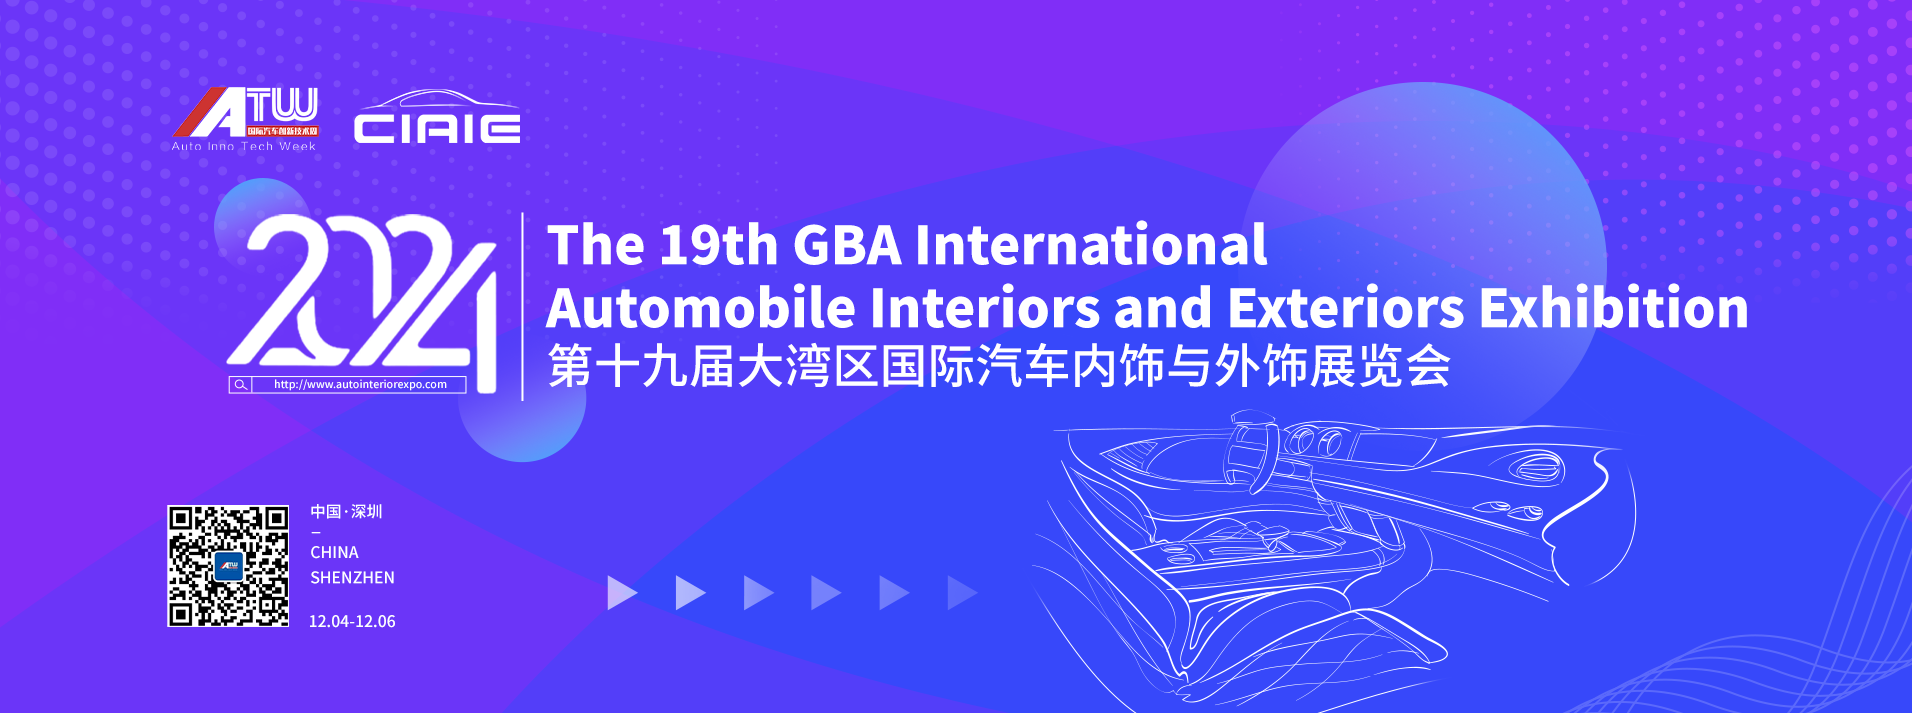 The 19th GBA International Automotive Interiors and Exteriors Exhibition